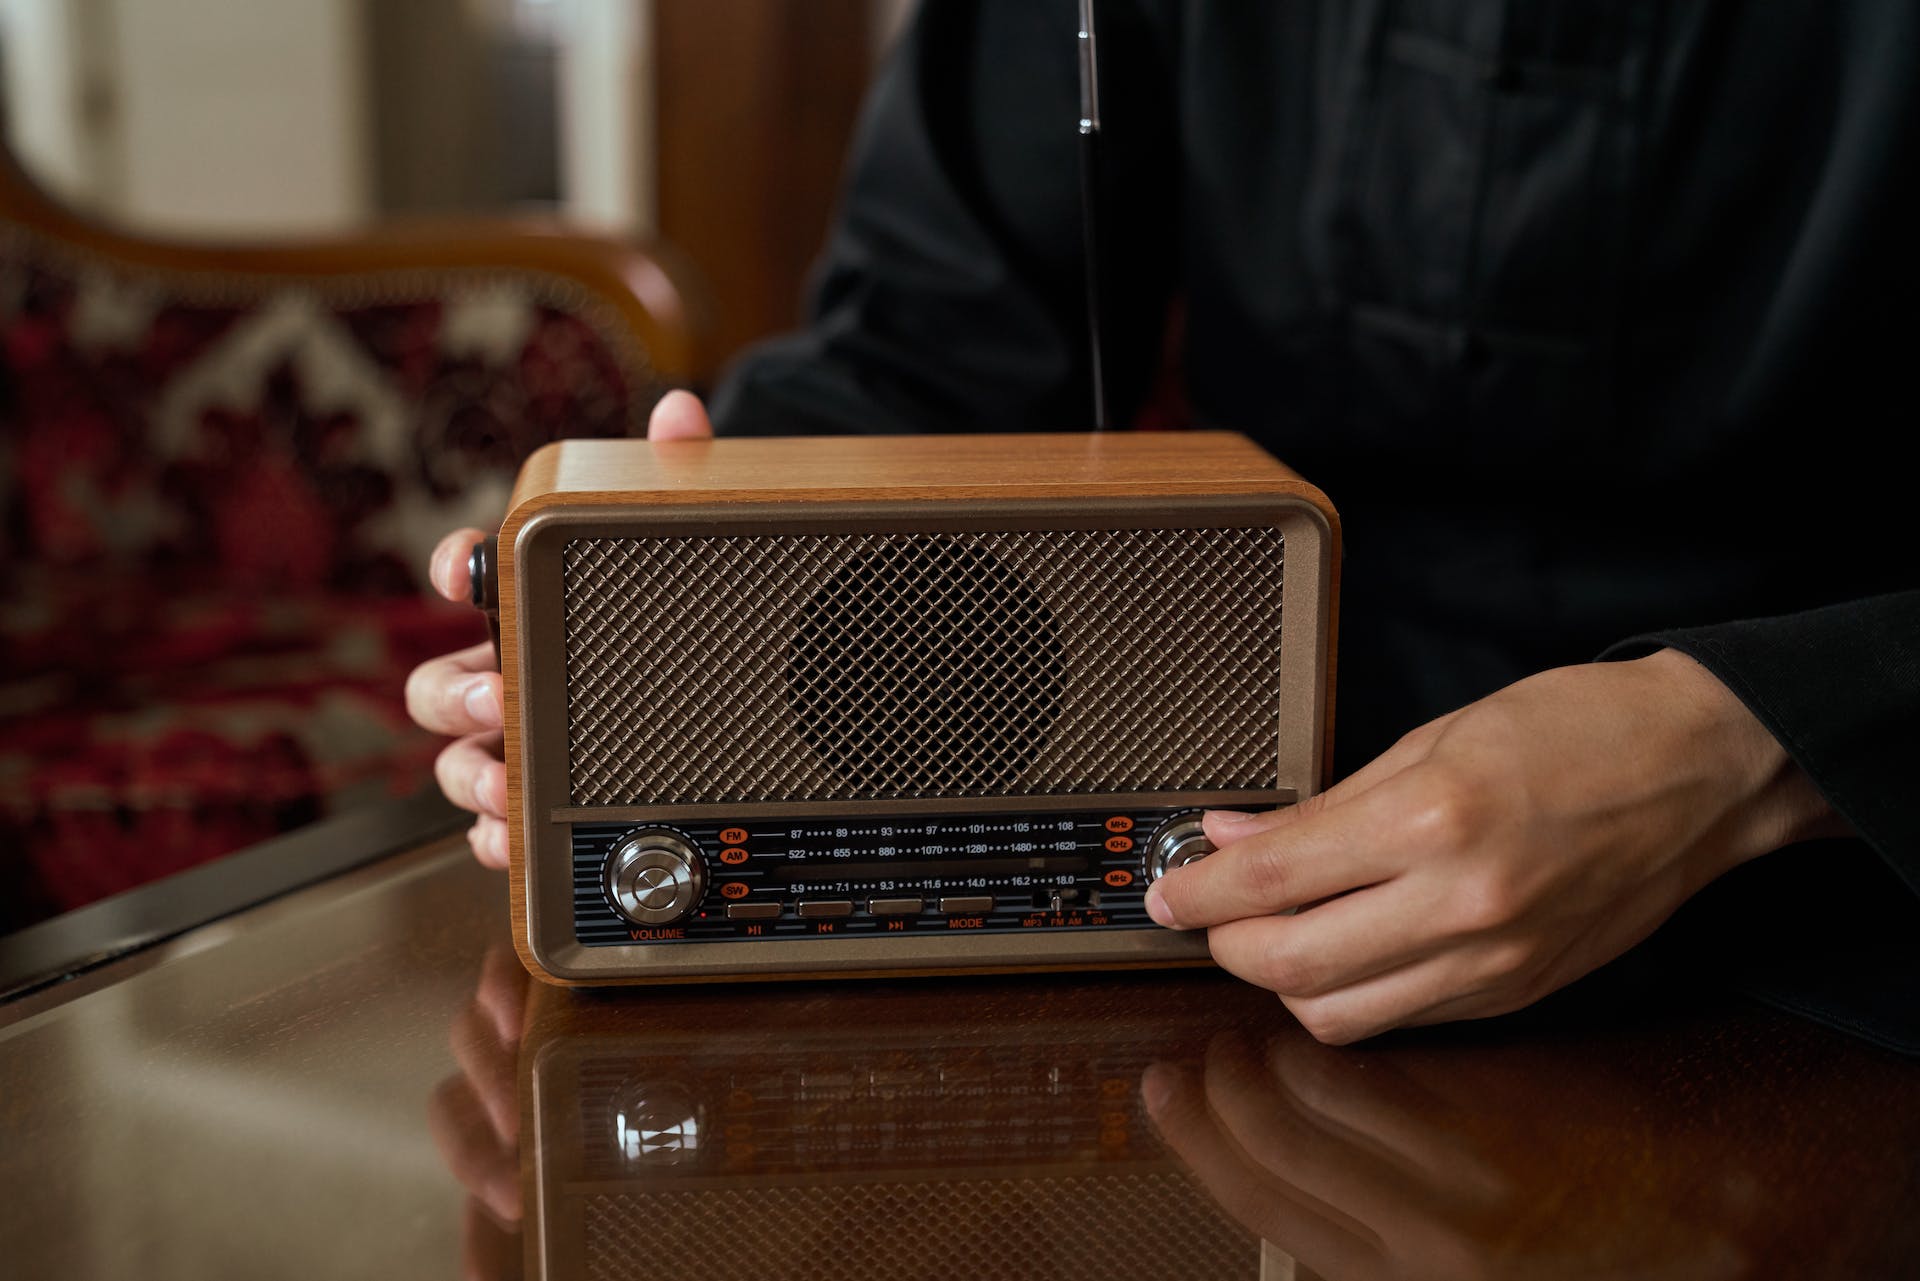 A person holding a radio | Source: Pexels